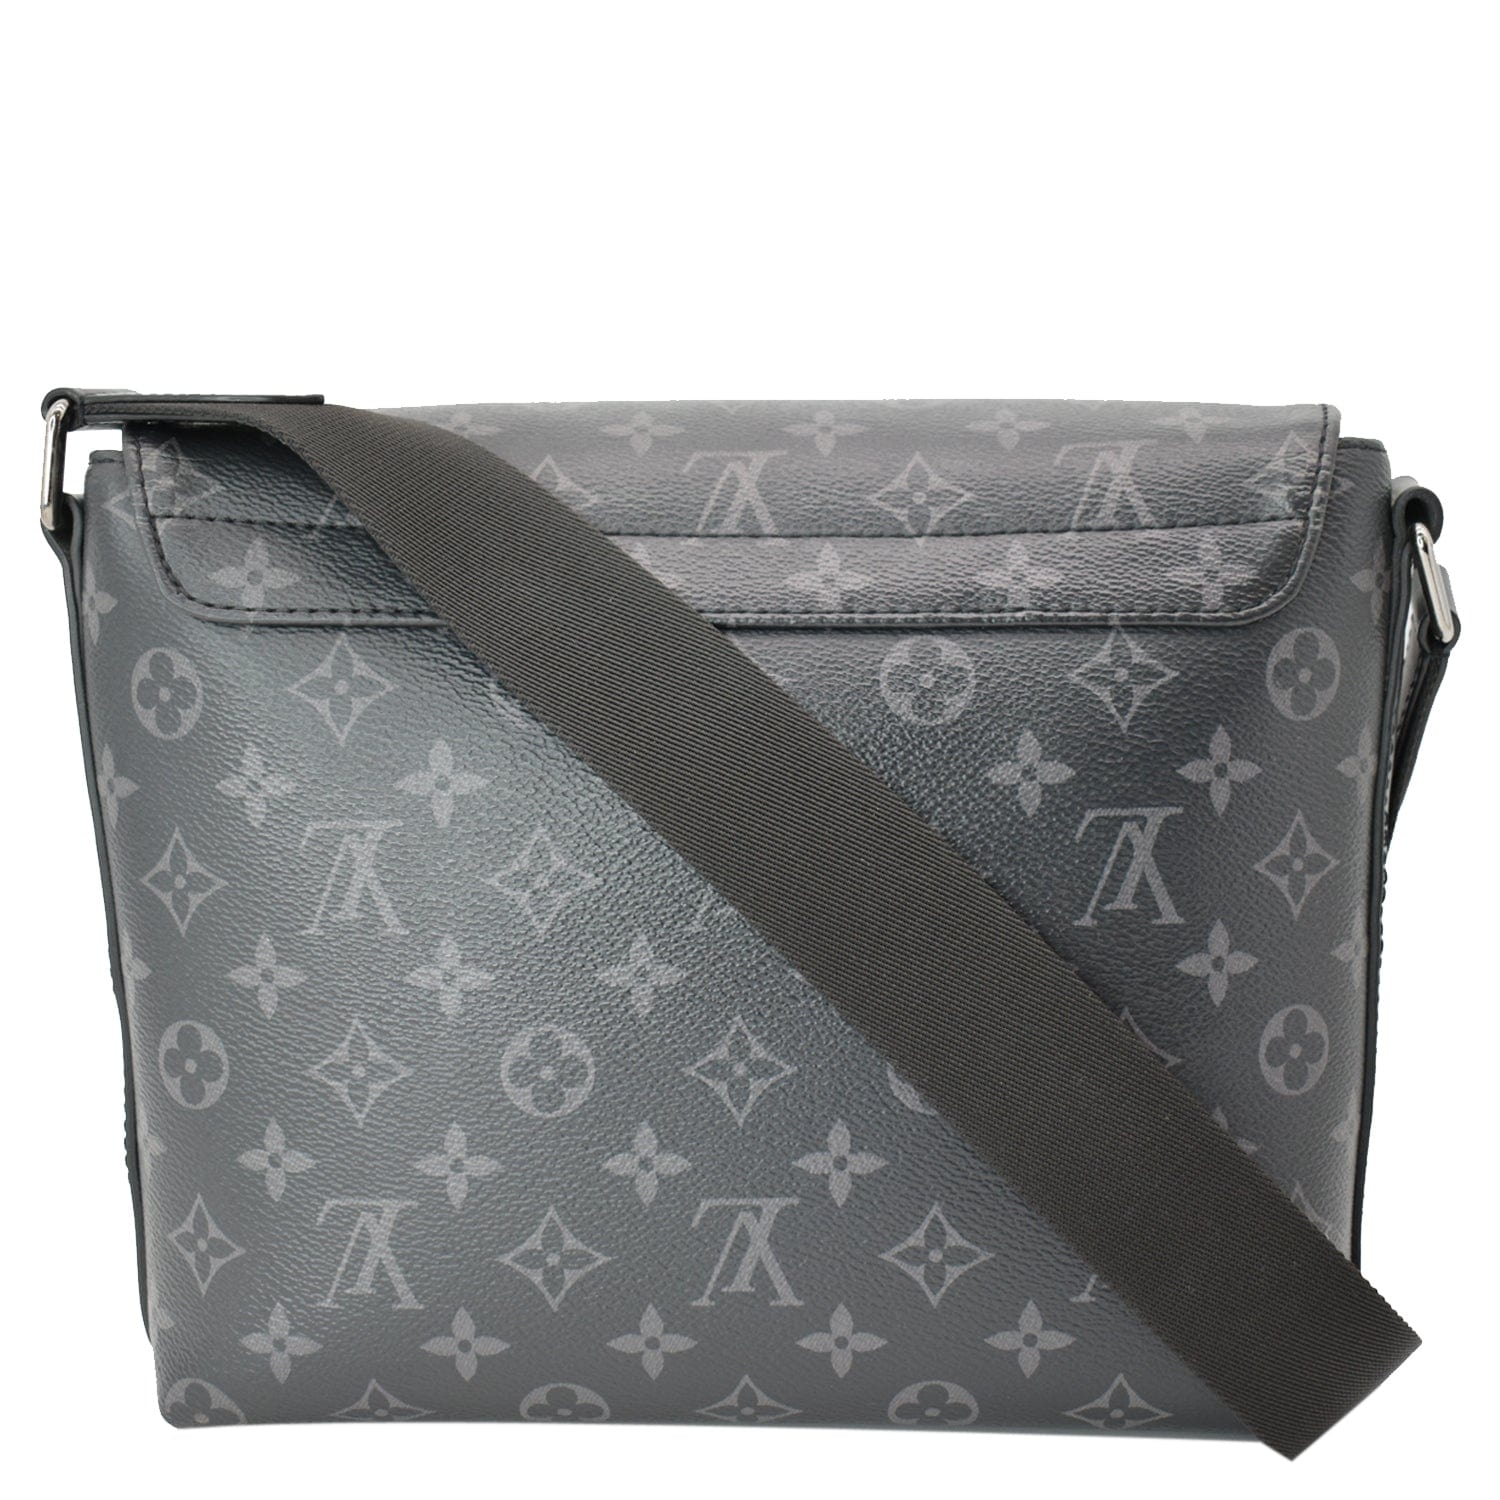 District leather bag Louis Vuitton Black in Leather - 29451604